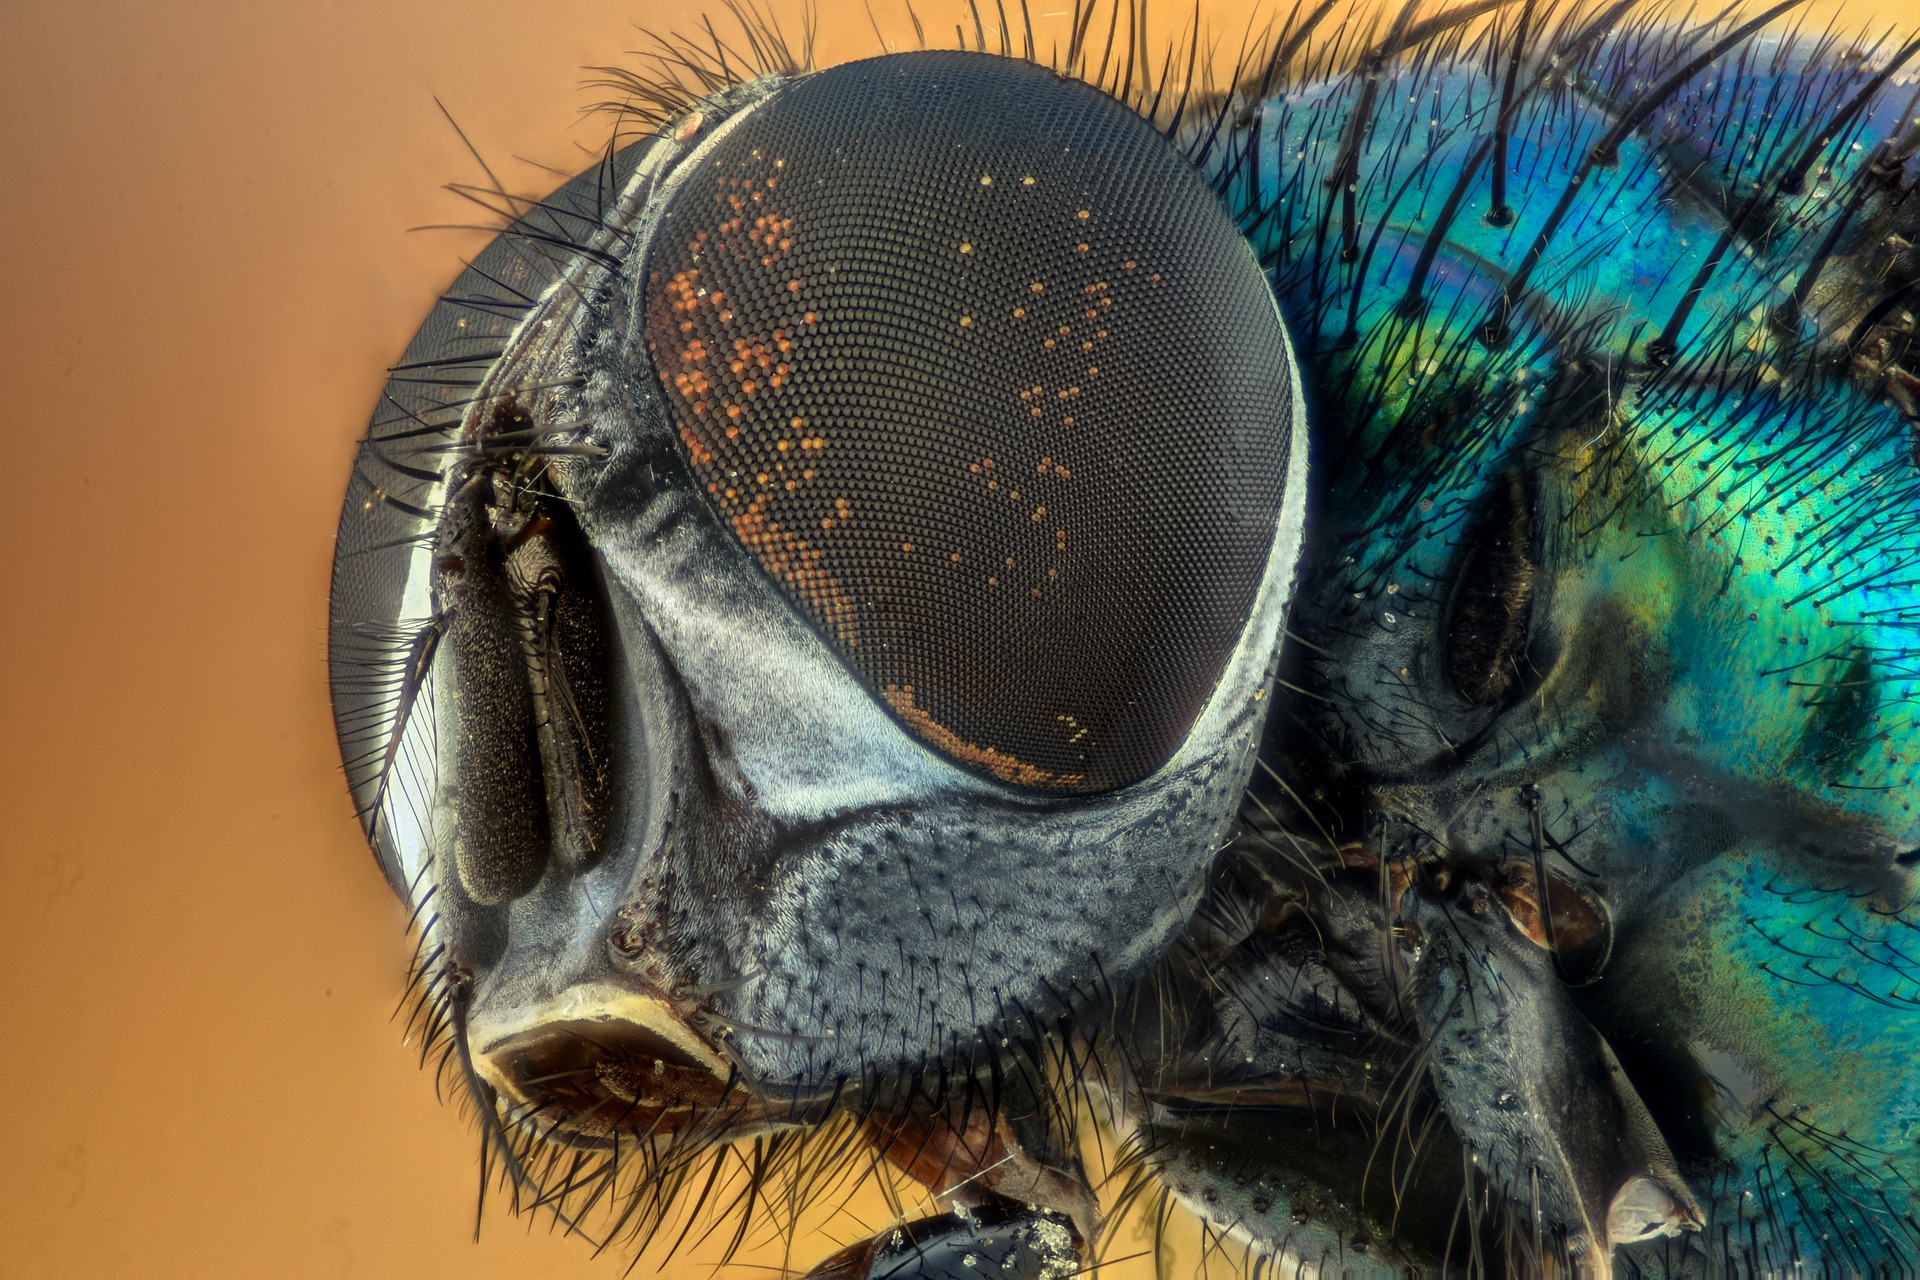 a close-up of a fly's face